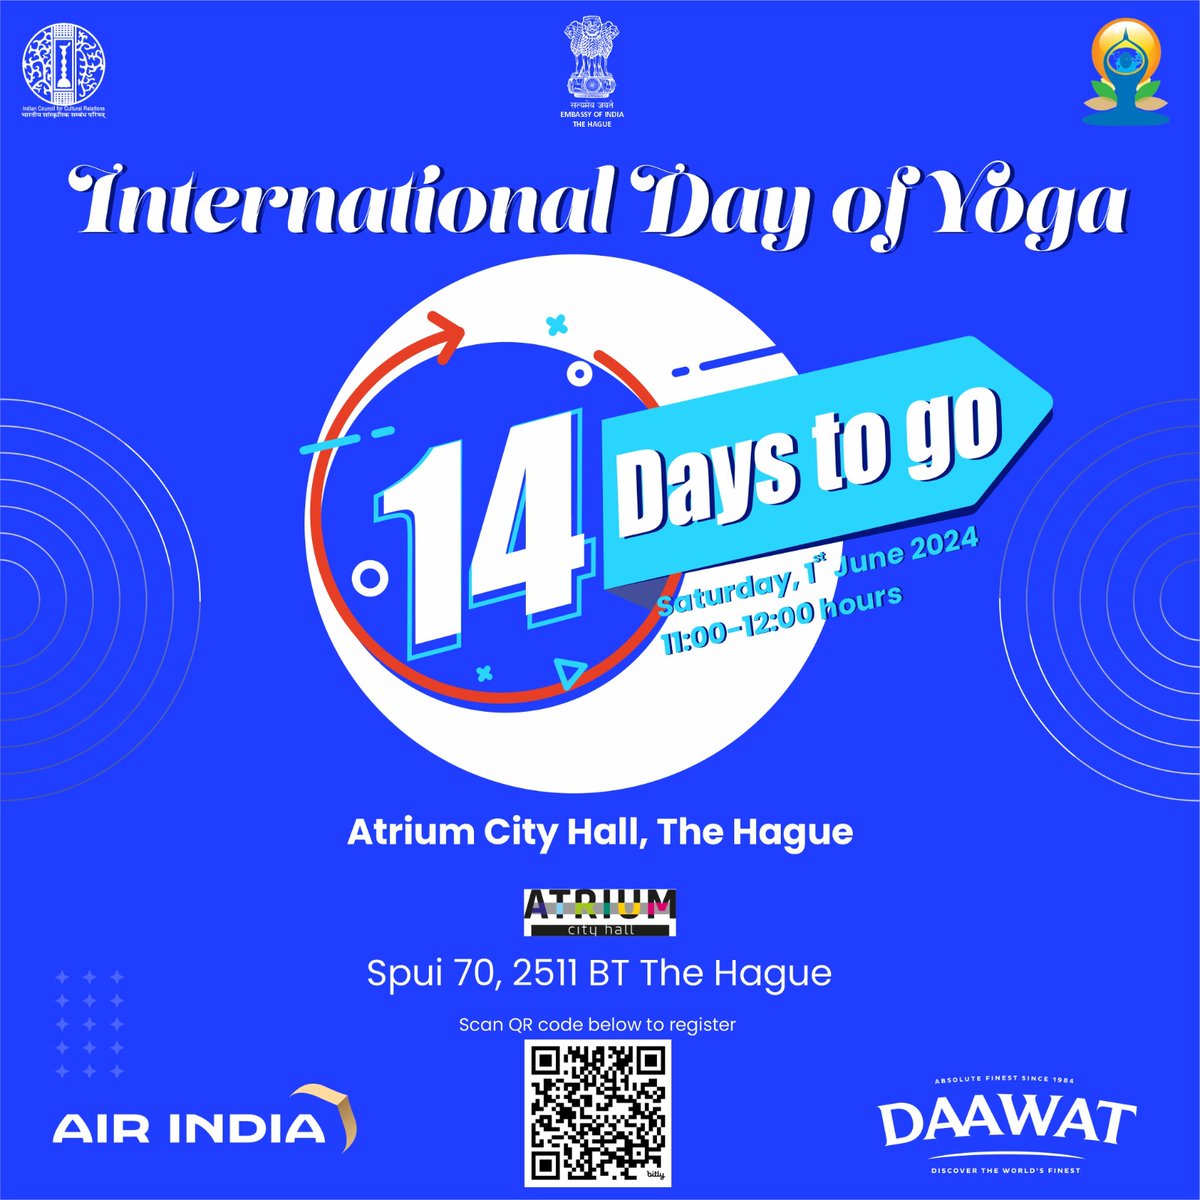 Don't forget to register for our #InternationalDayofYoga event on Saturday, 1 June in association with @GemeenteDenHaag @AtriumCityHall Register @ bit.ly/4b7fWIY or scan QR code👇 @MEAIndia @moayush @iccr_hq @iccr_TheHague @IndianDiplomacy @DiasporaDiv_MEA